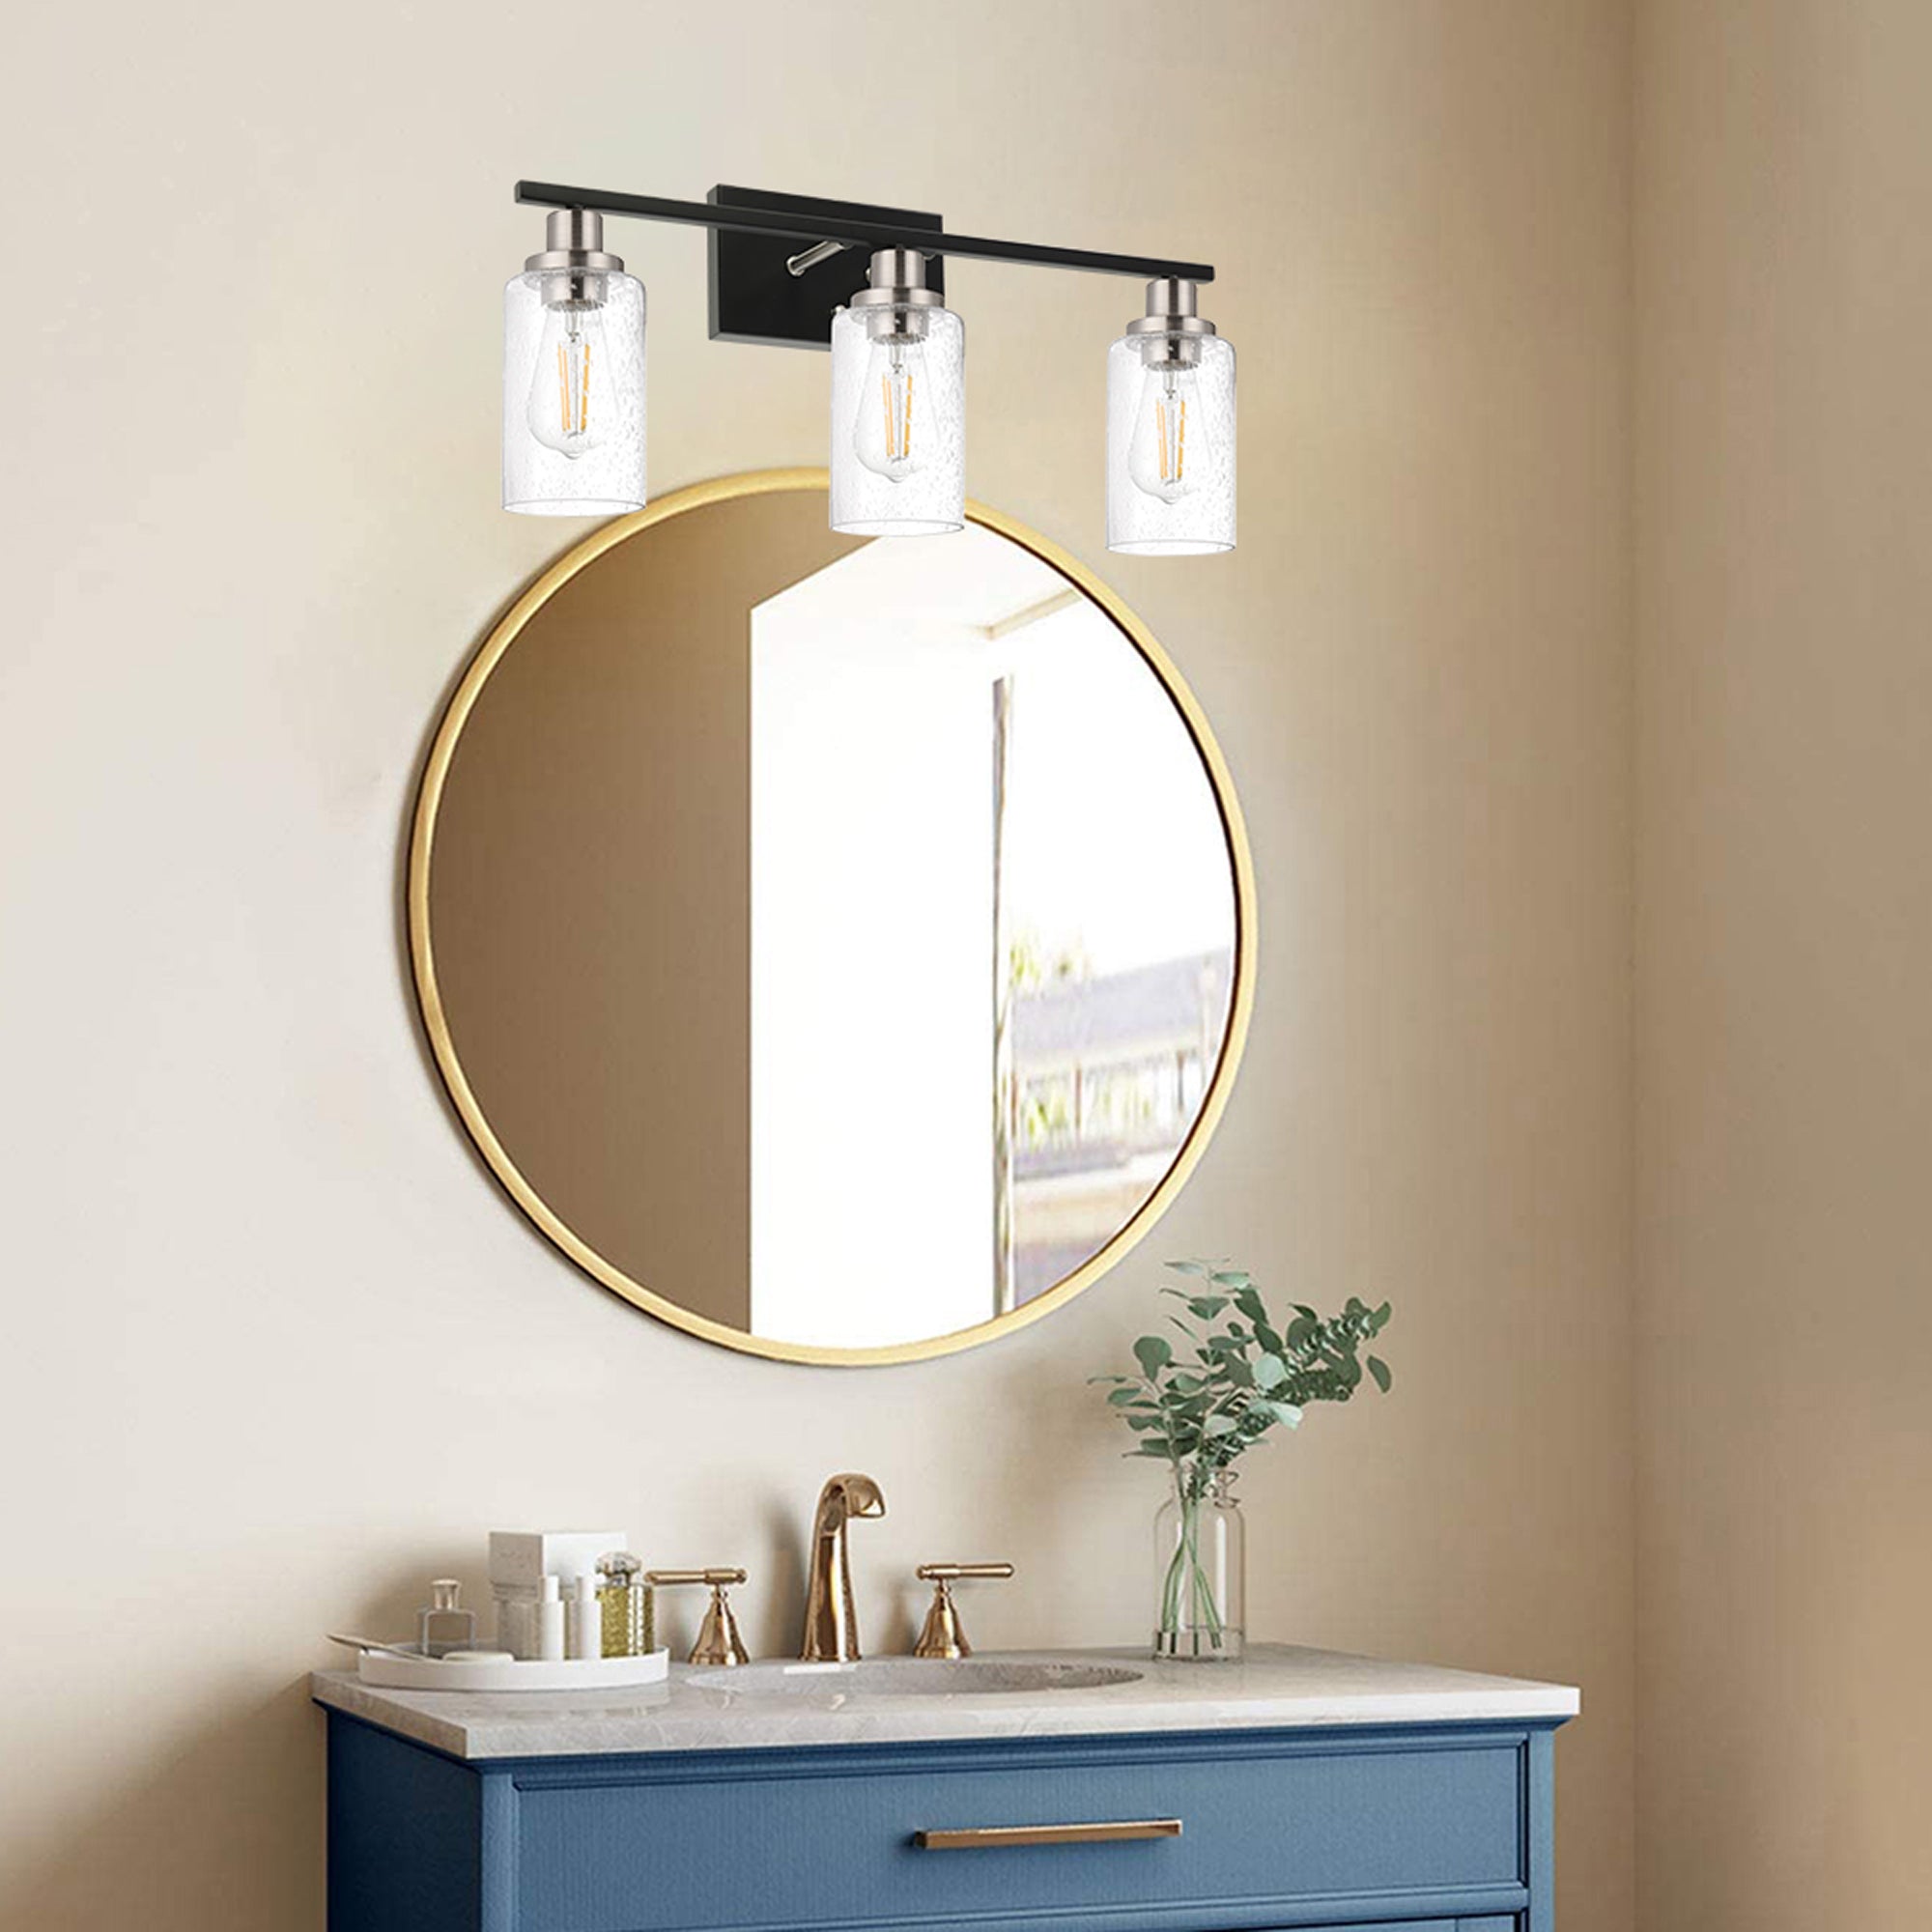 3 Lights Vanity Lights for Bathroom 23.6 Inches, Wall Mounted Light Fixture Farmhouse Bathroom Light Fixtures with Seeded Glass Shade, Black and Brushed Nickel Finish